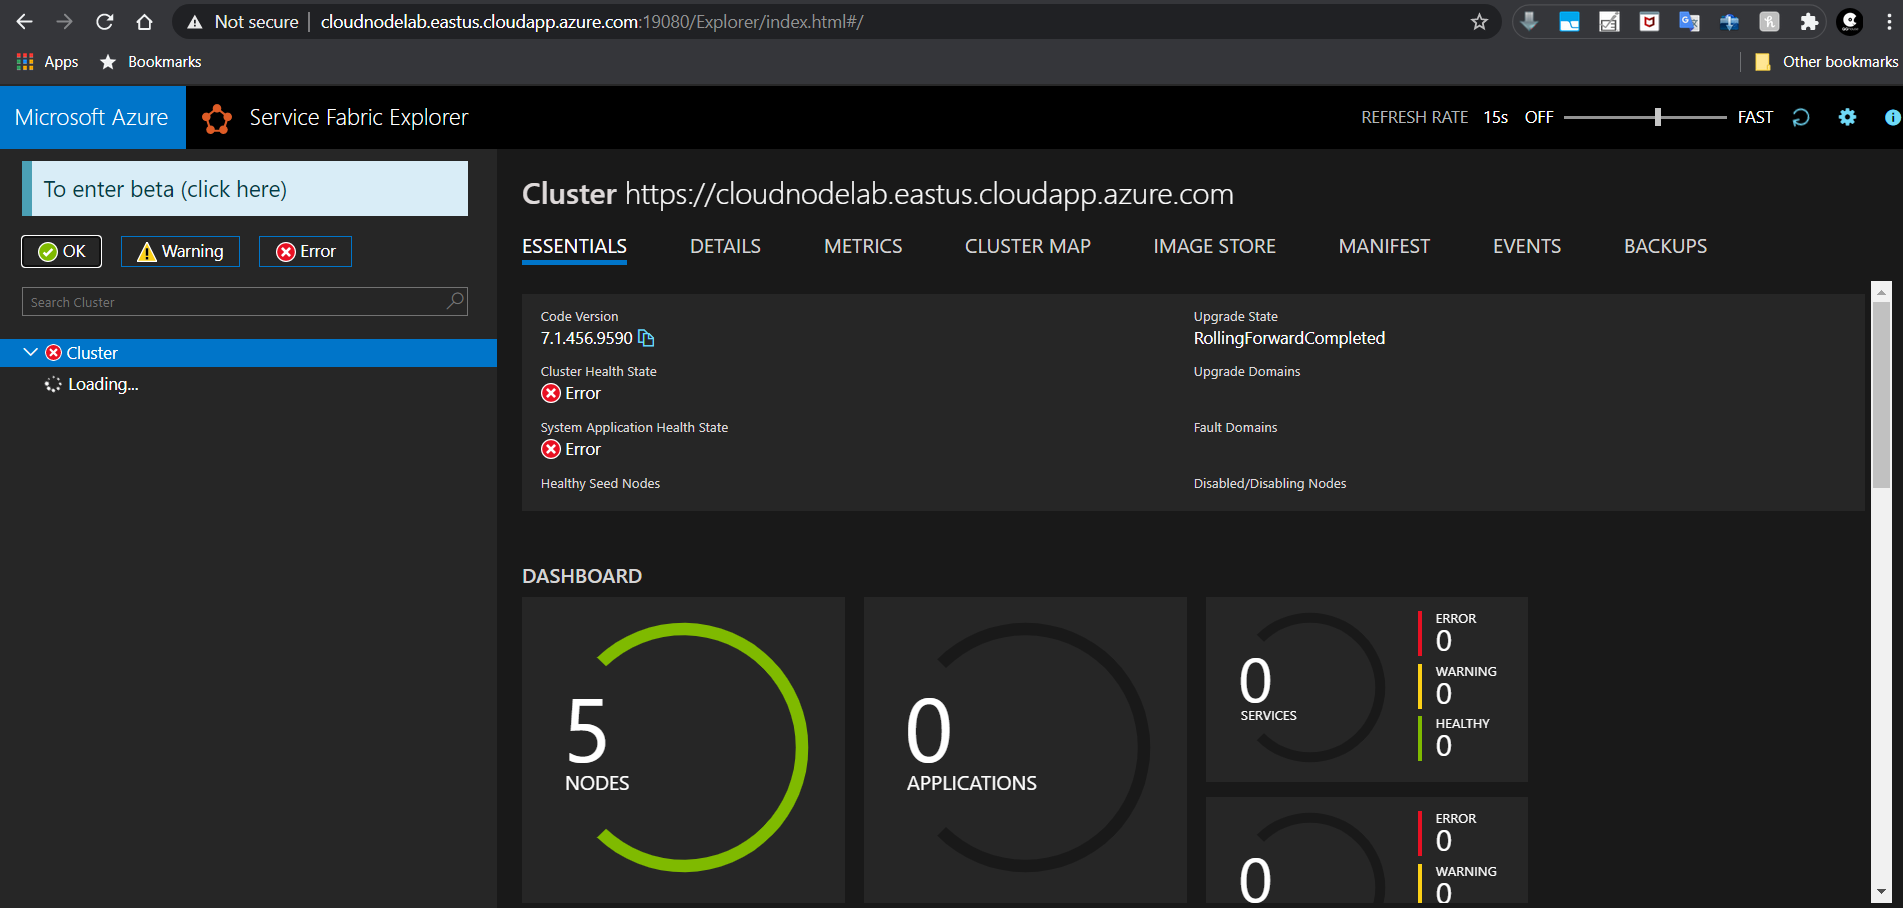 Creating an Azure Service Fabric Cluster